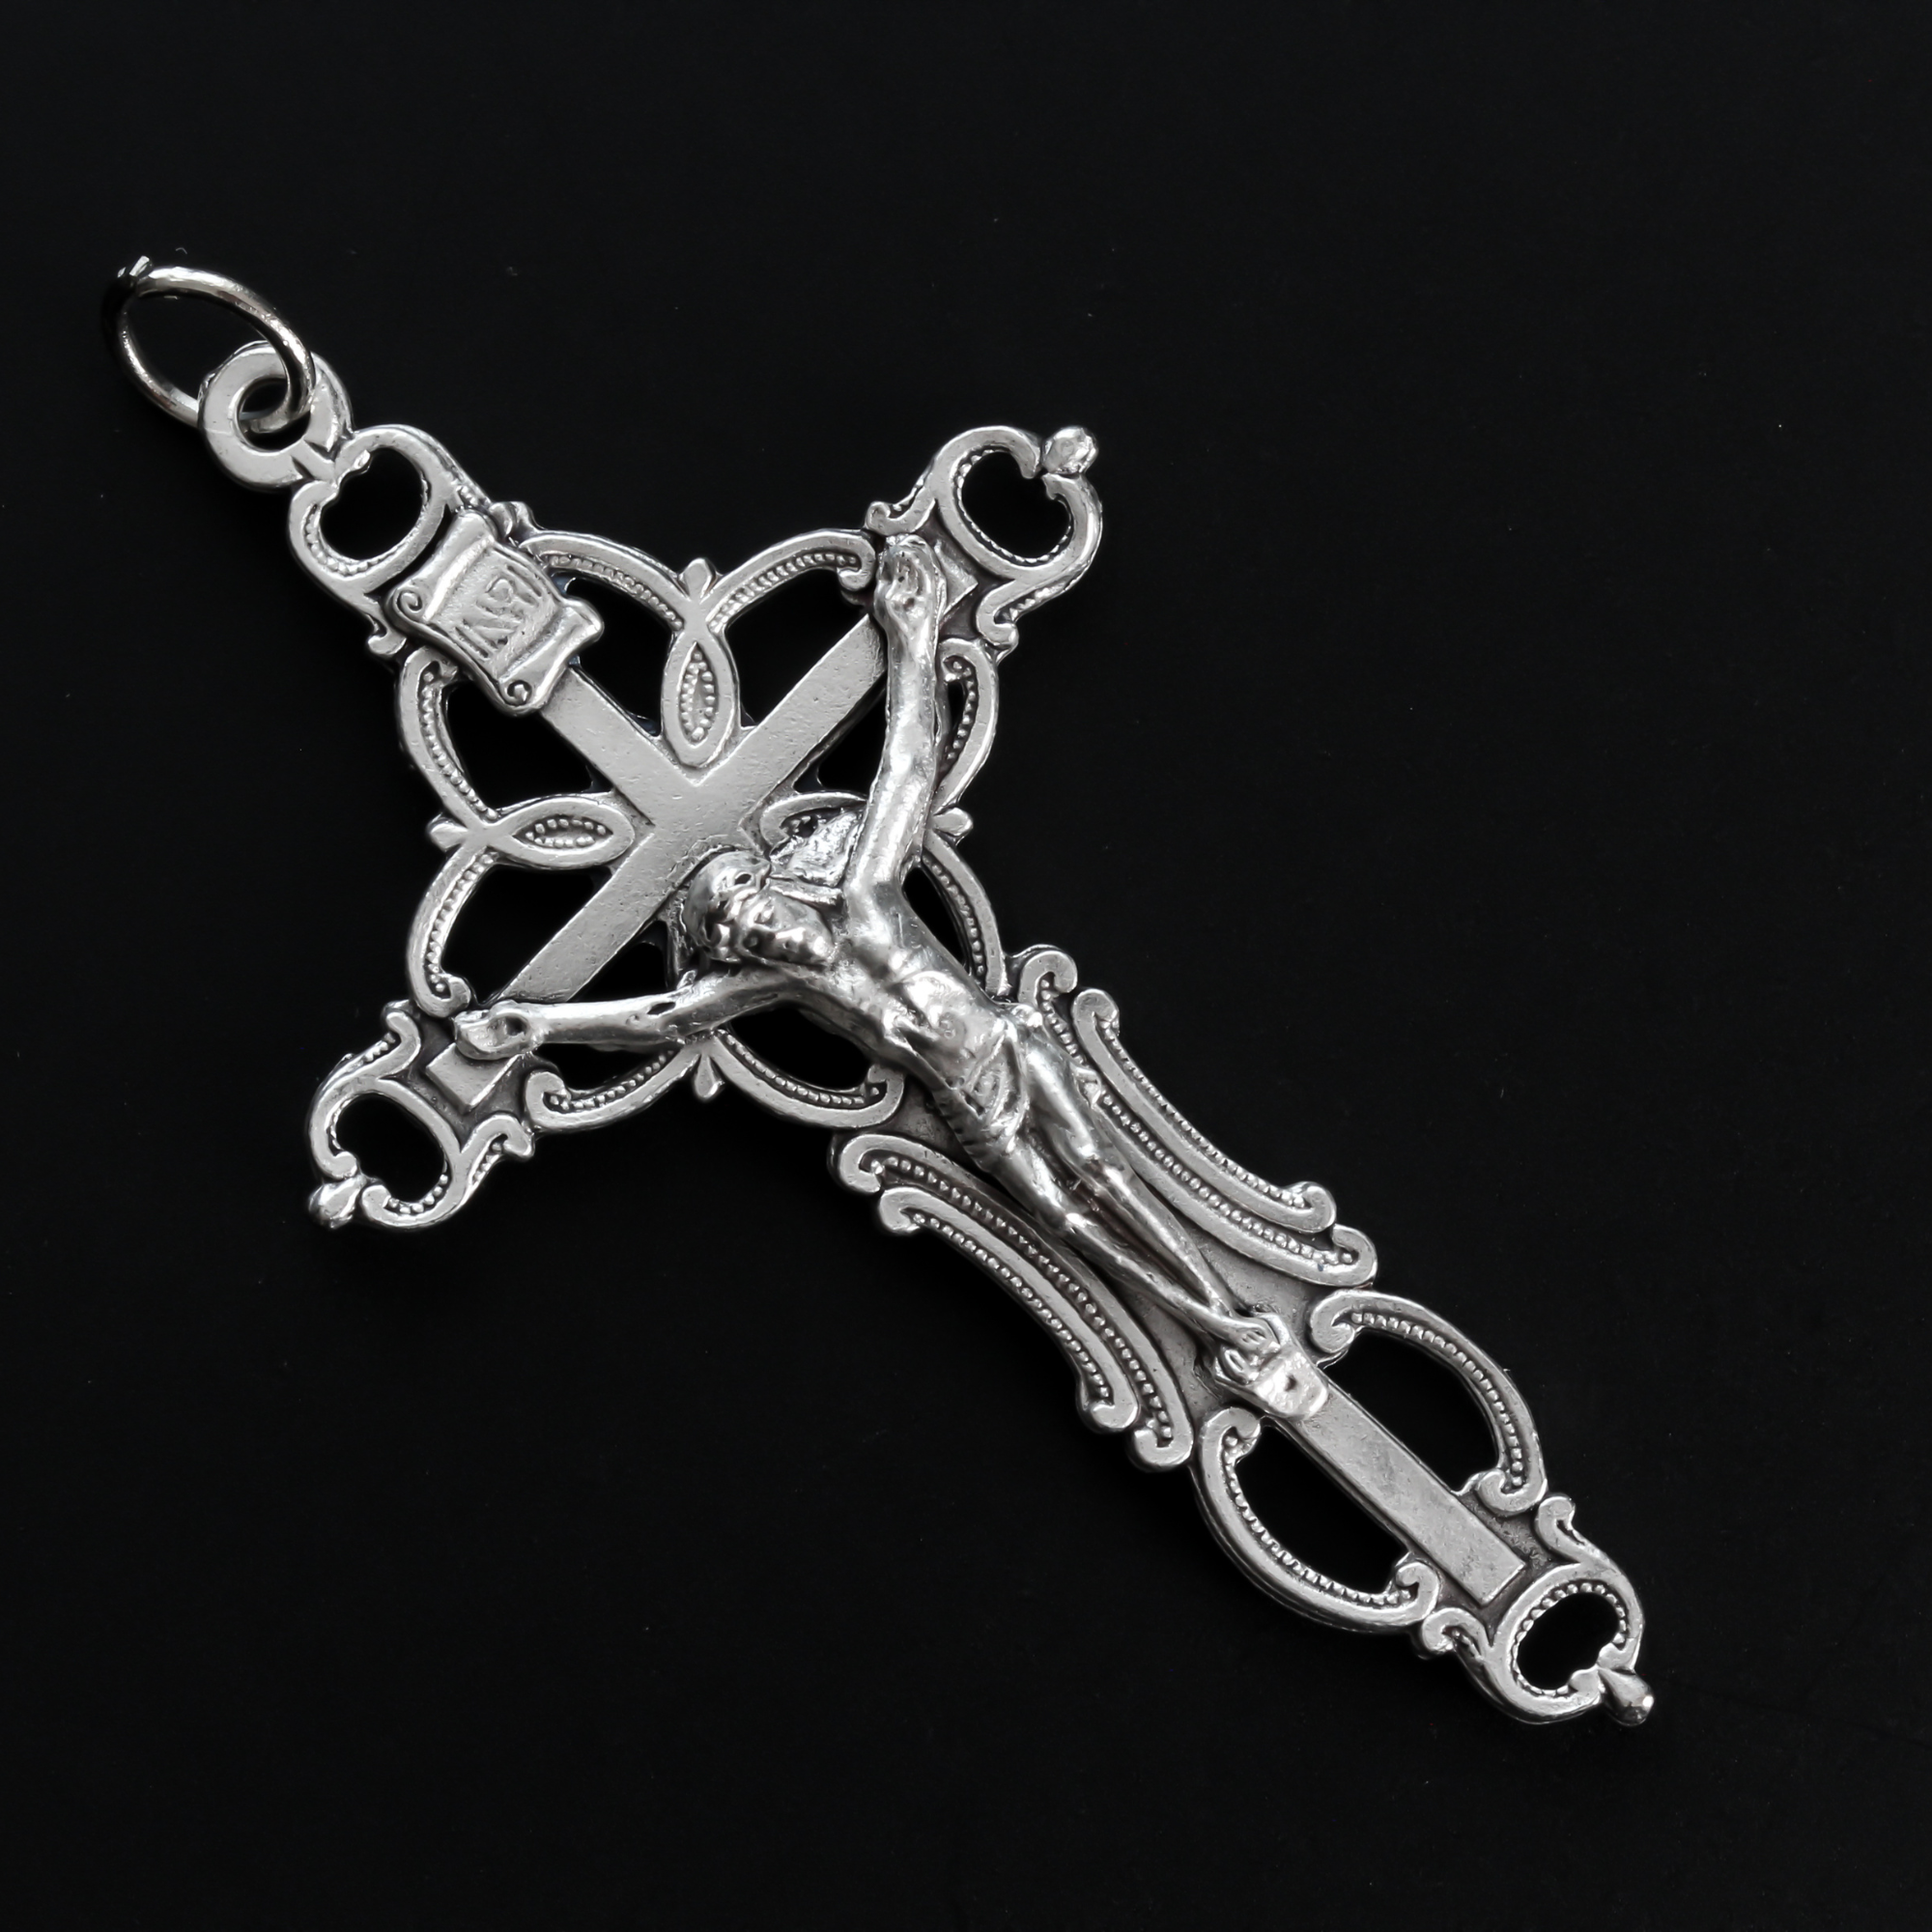 Ornate Orthodox style crucifix cross with beautiful cut out detailing on the cross, oxidized silver plating 2.25" long